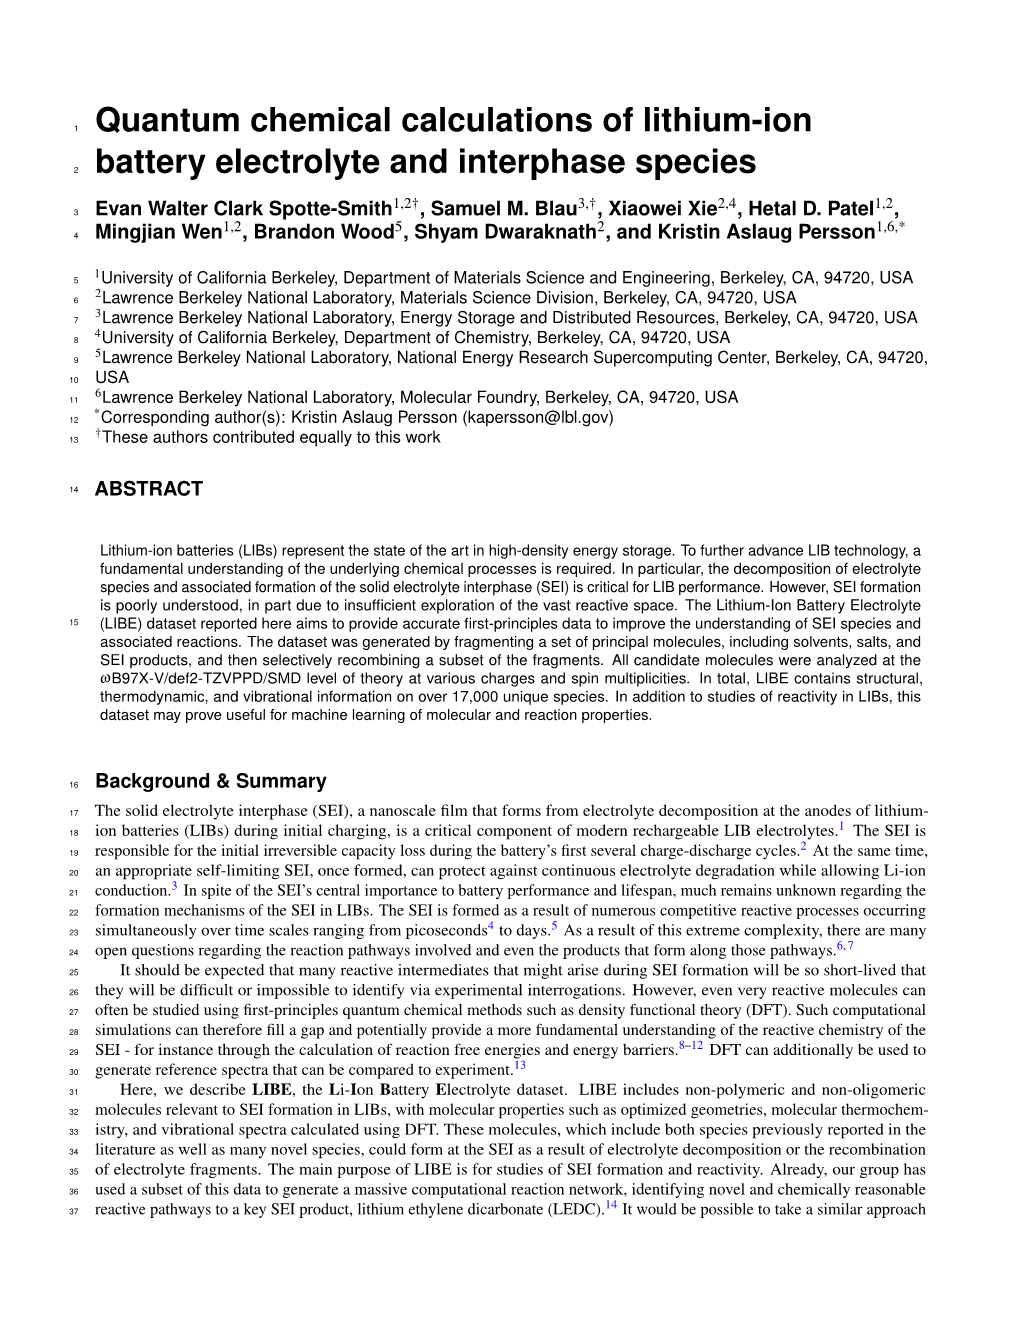 Quantum Chemical Calculations of Lithium-Ion Battery Electrolyte and Interphase Species